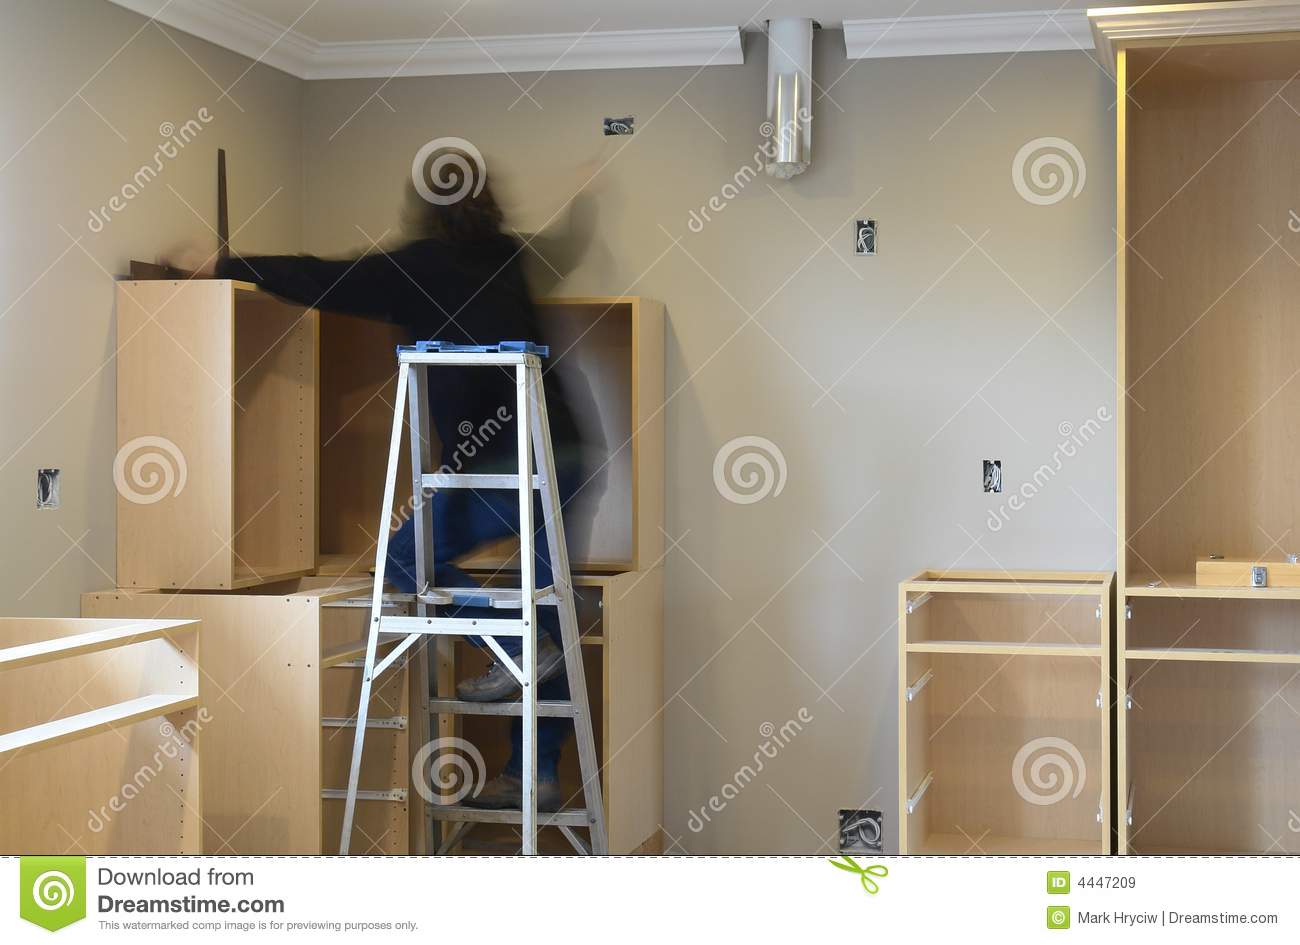 Cabinetmaker Working At Installing New Kitchen Cabinets In A Home